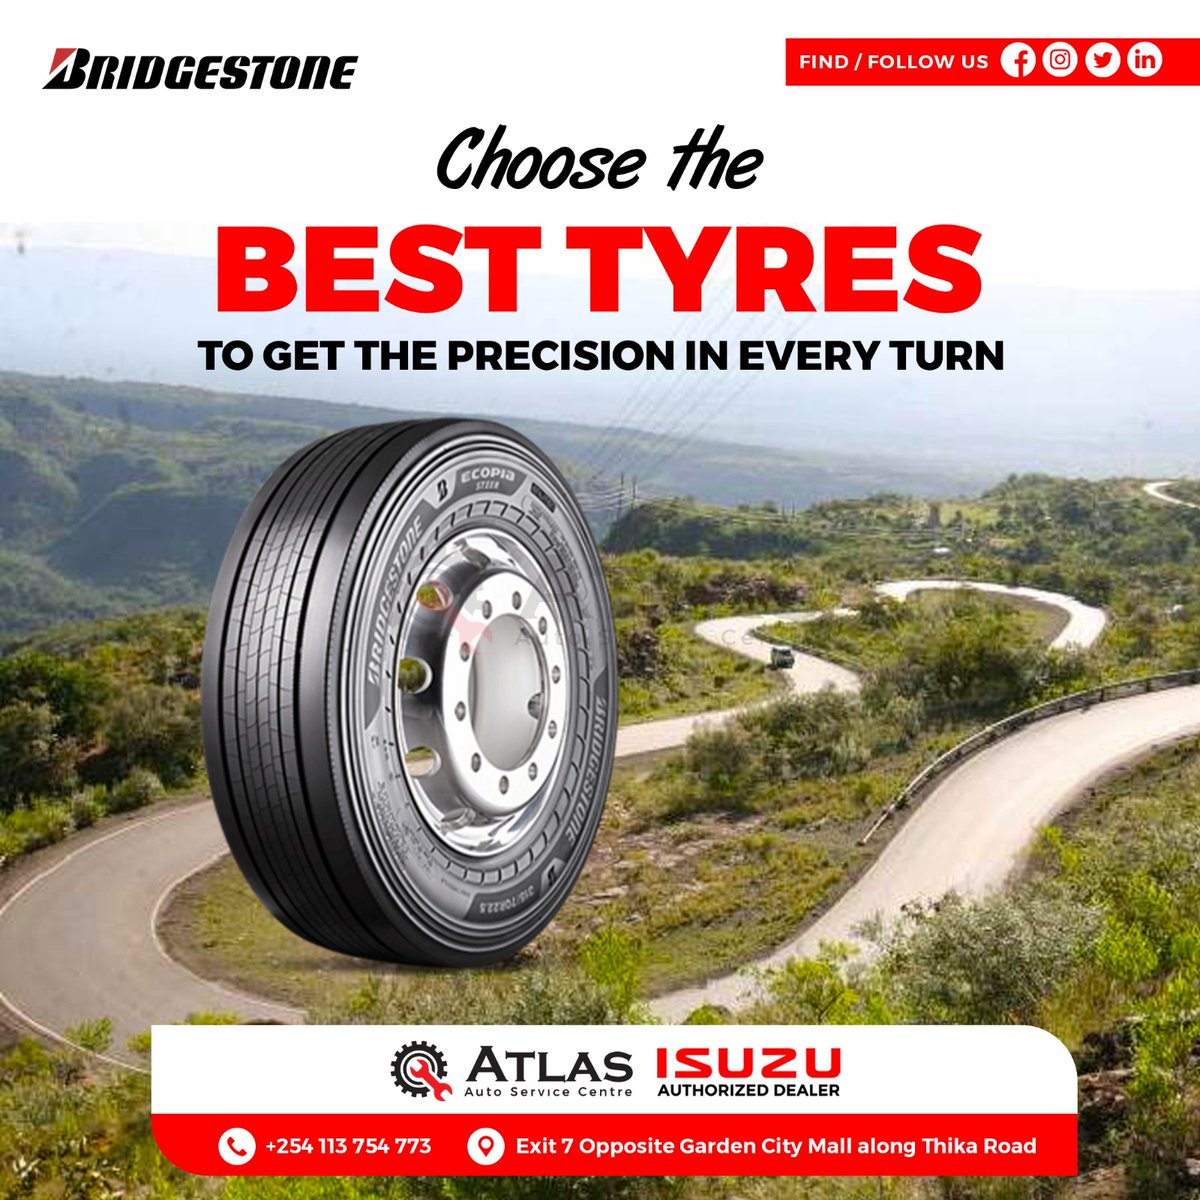 Precision in every turn starts with Bridgestone Tires. 🔄 Choose the best, drive the best. Visit @Atlasautocentre to get your car one #howcanwehelp #garage #BridgestoneTires #PrecisionDriving #PerfectMatchXtra #QueenOfTearsEp15